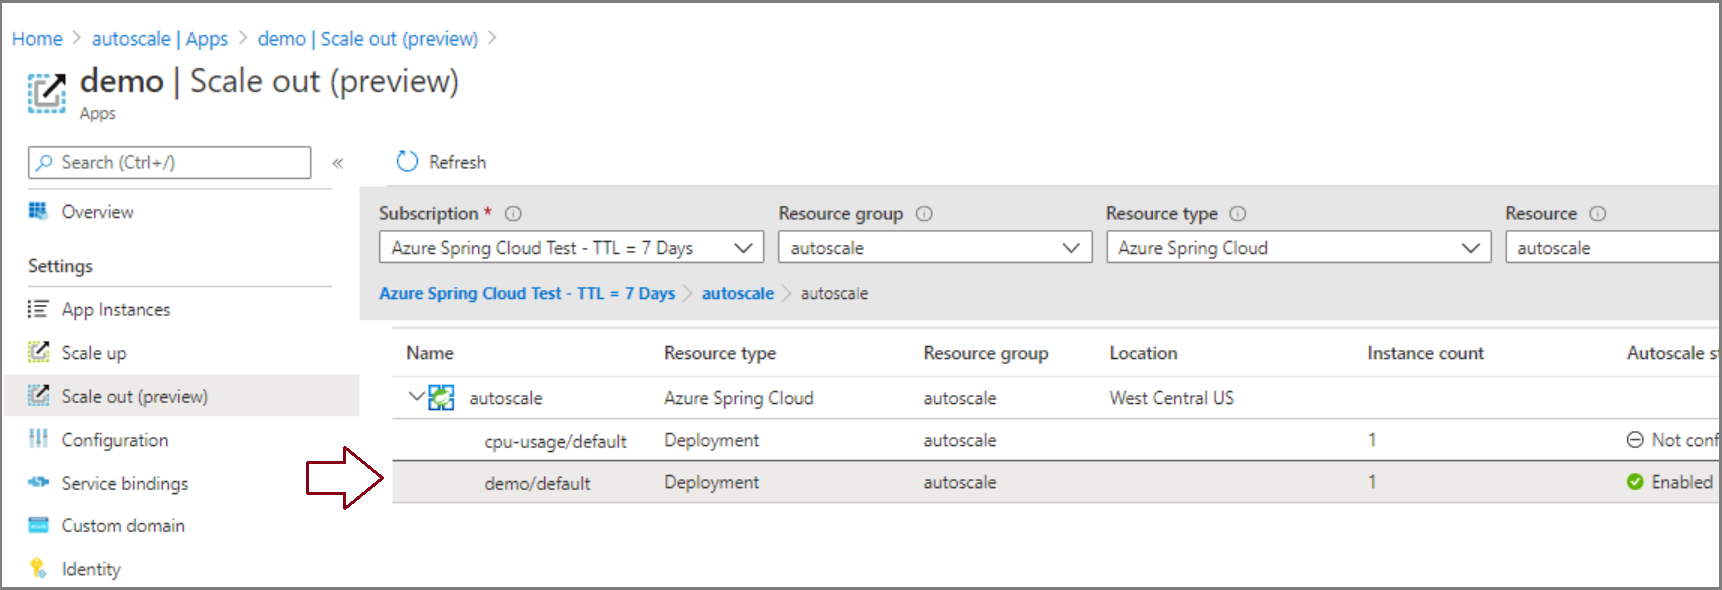 Screenshot of Azure portal Scale out page with demo/default deployment indicated.